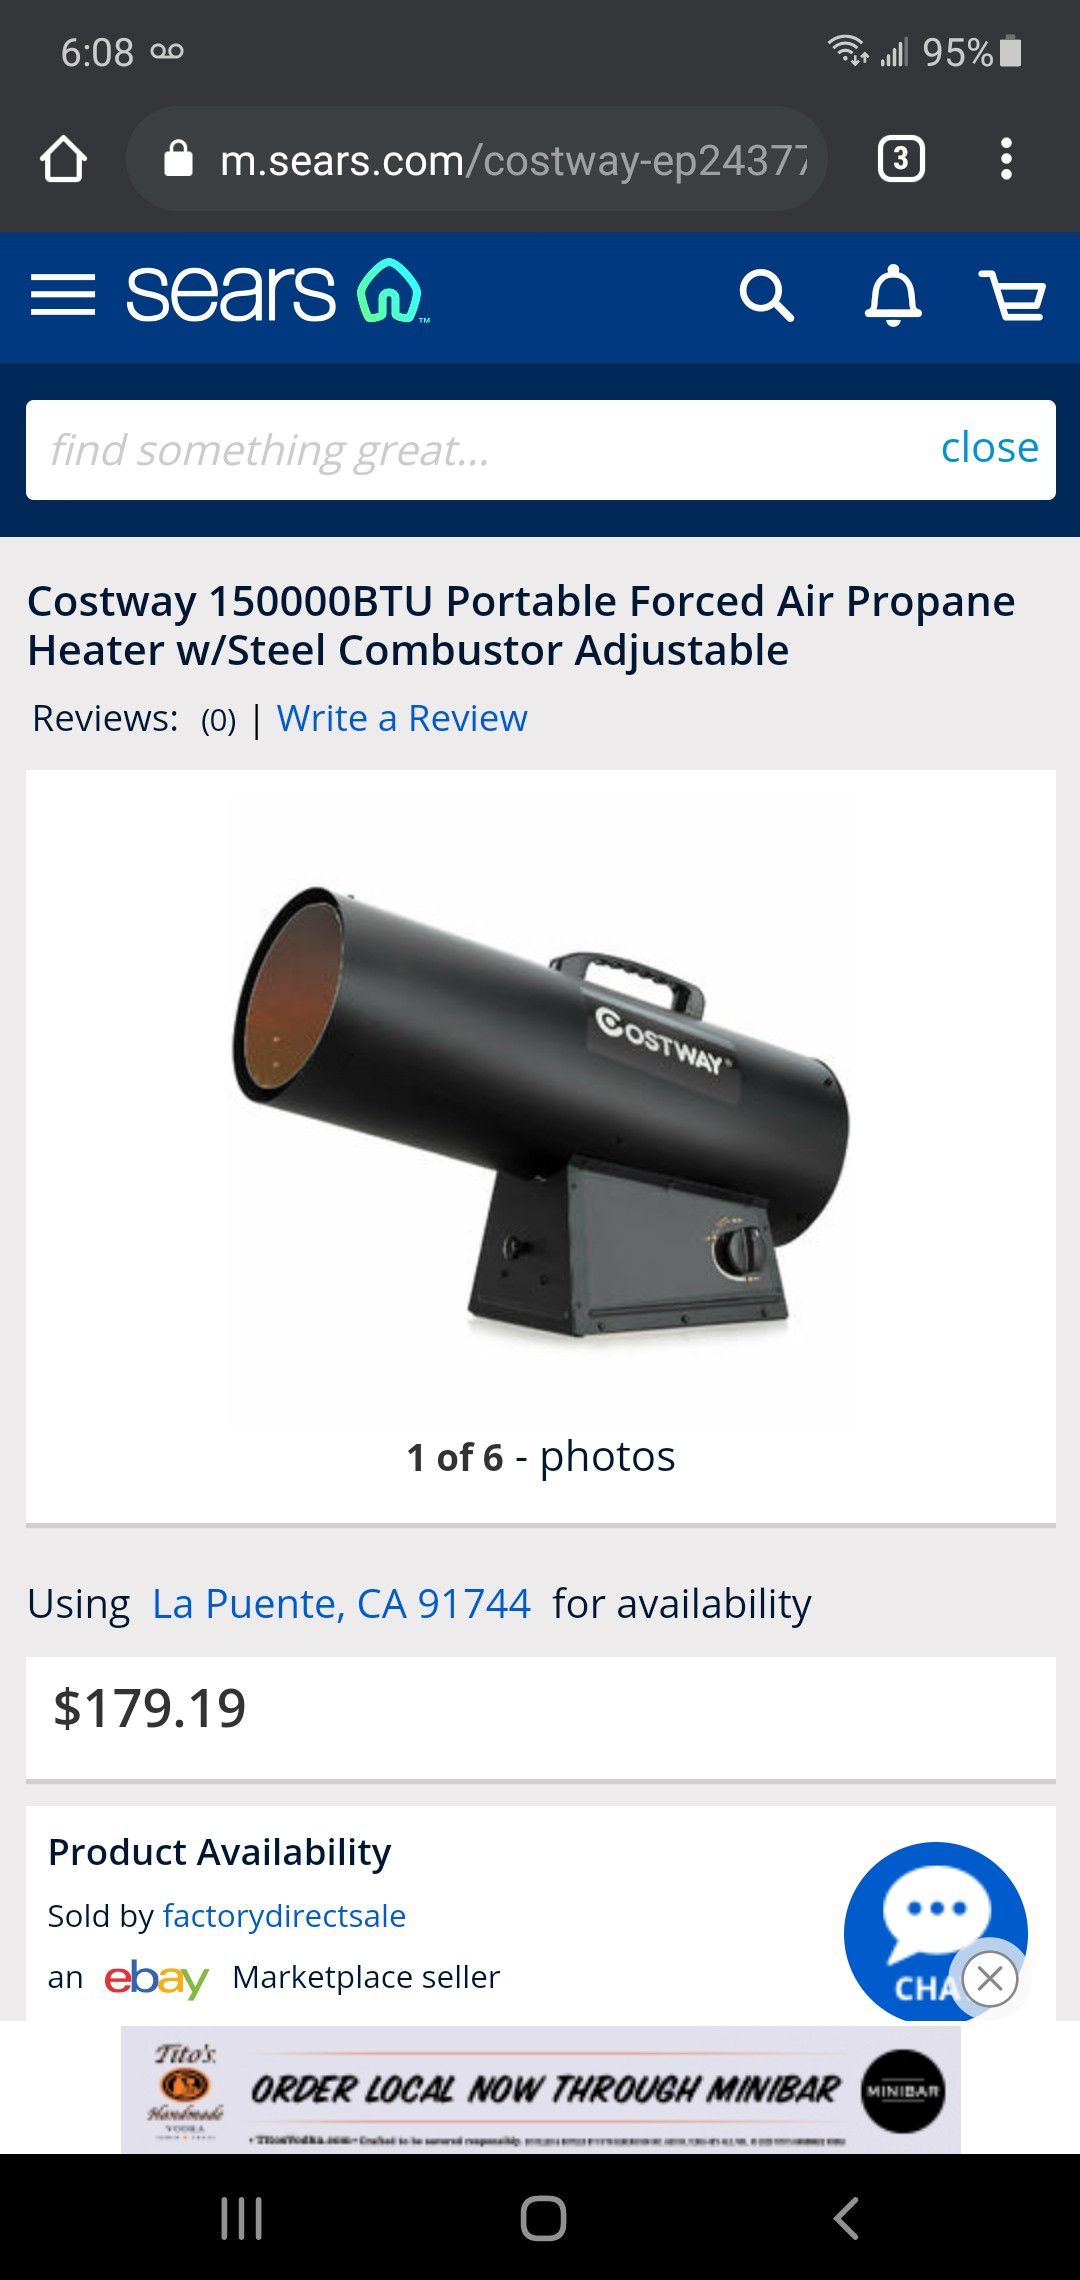 Brand new costway 150000BTU portable forced air propane heater w/steel combustor adjustable